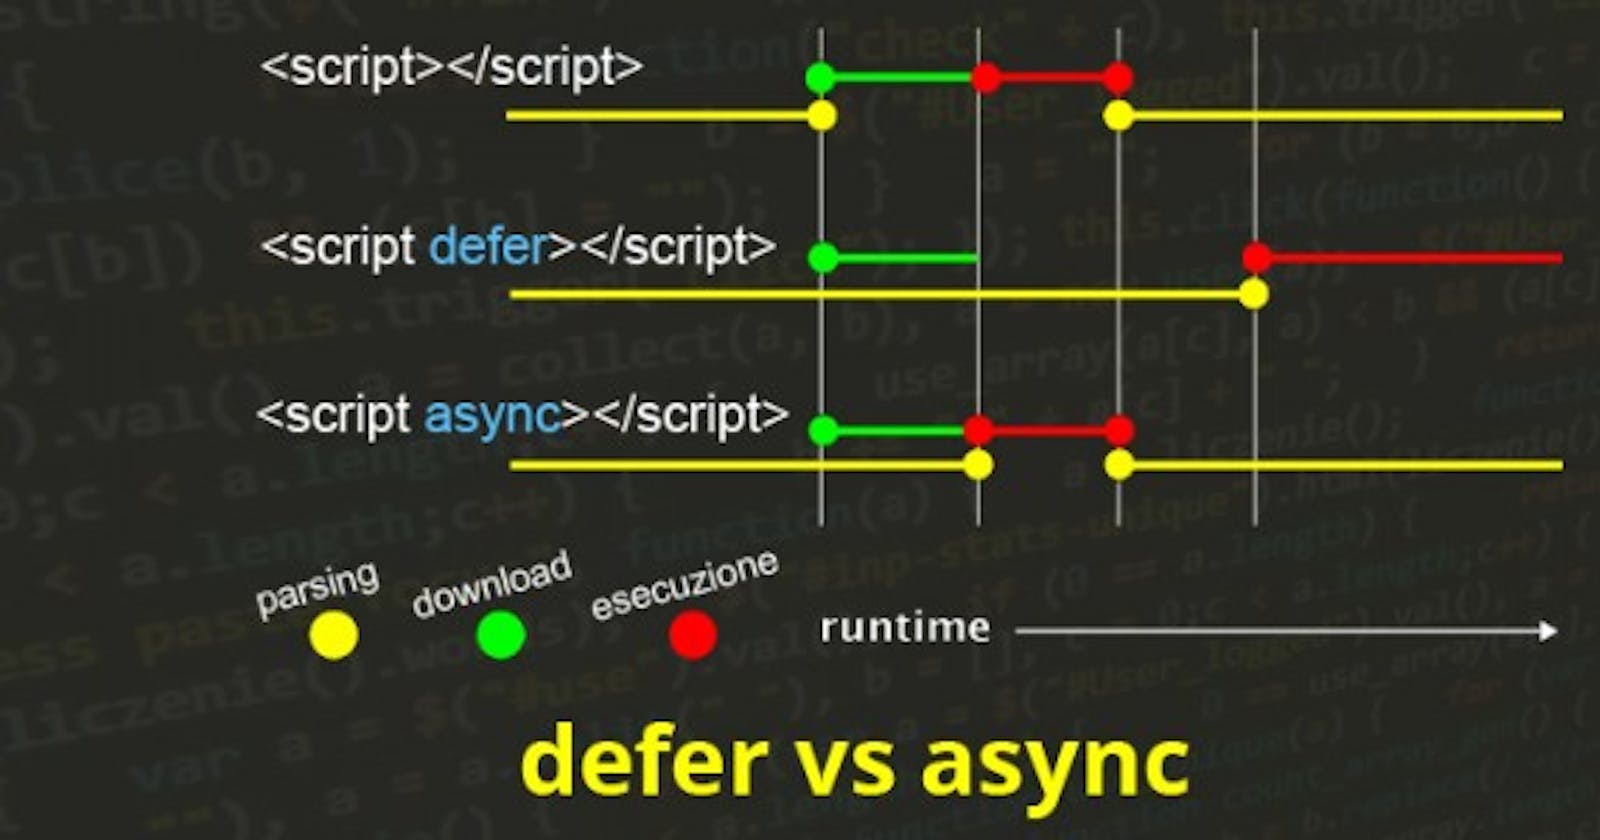 Usage of async and defer attribute in html script tag